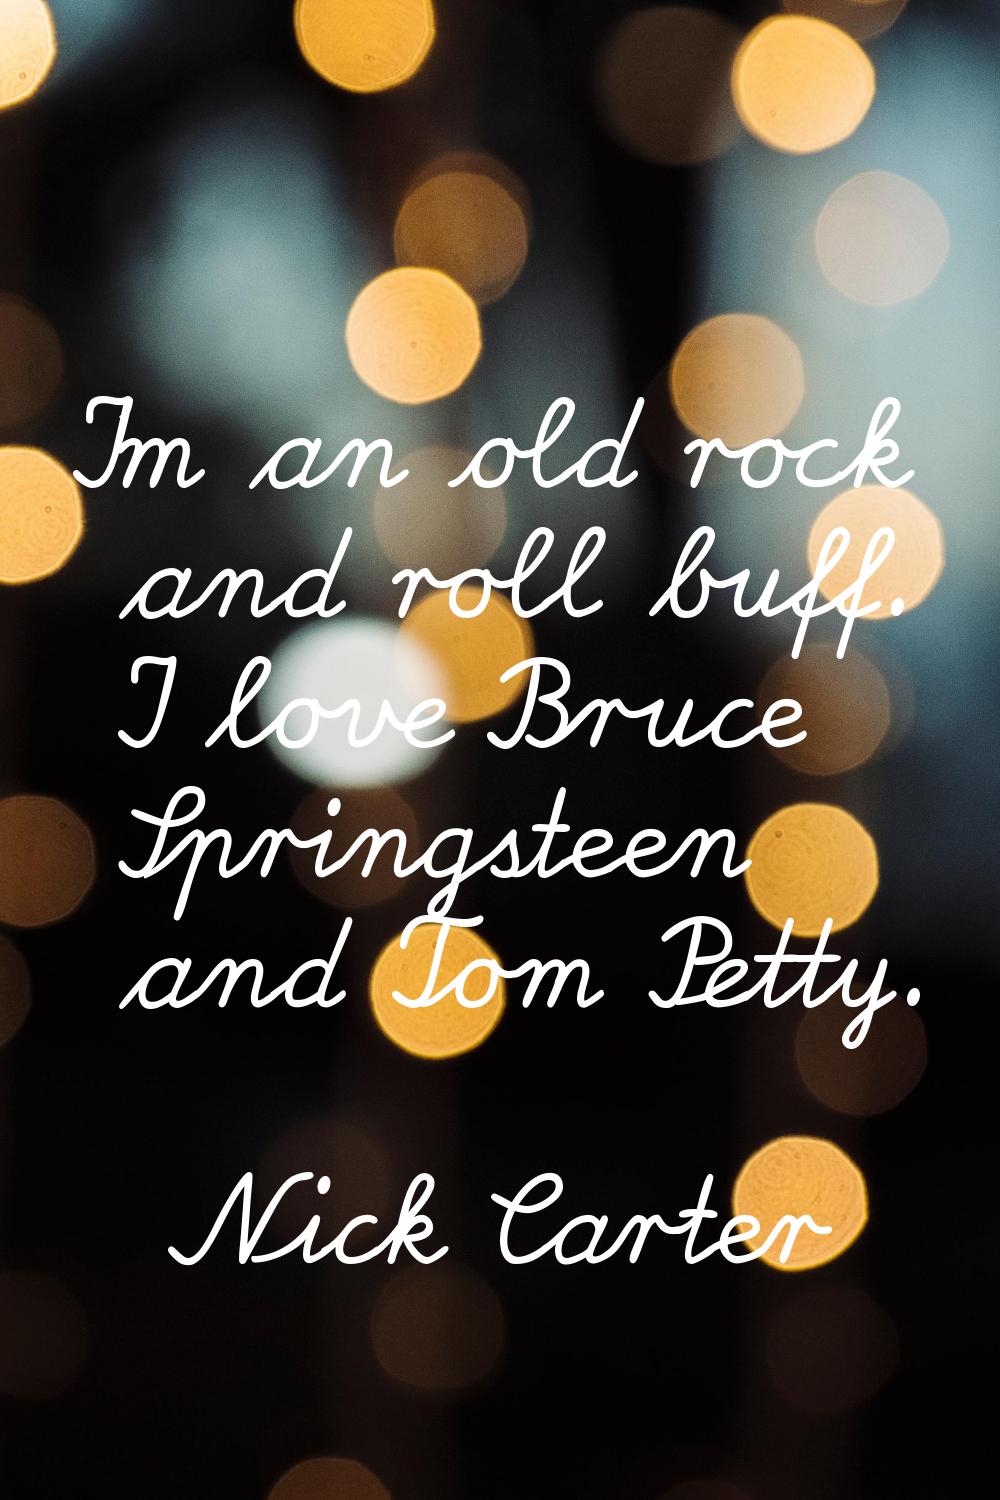 I'm an old rock and roll buff. I love Bruce Springsteen and Tom Petty.